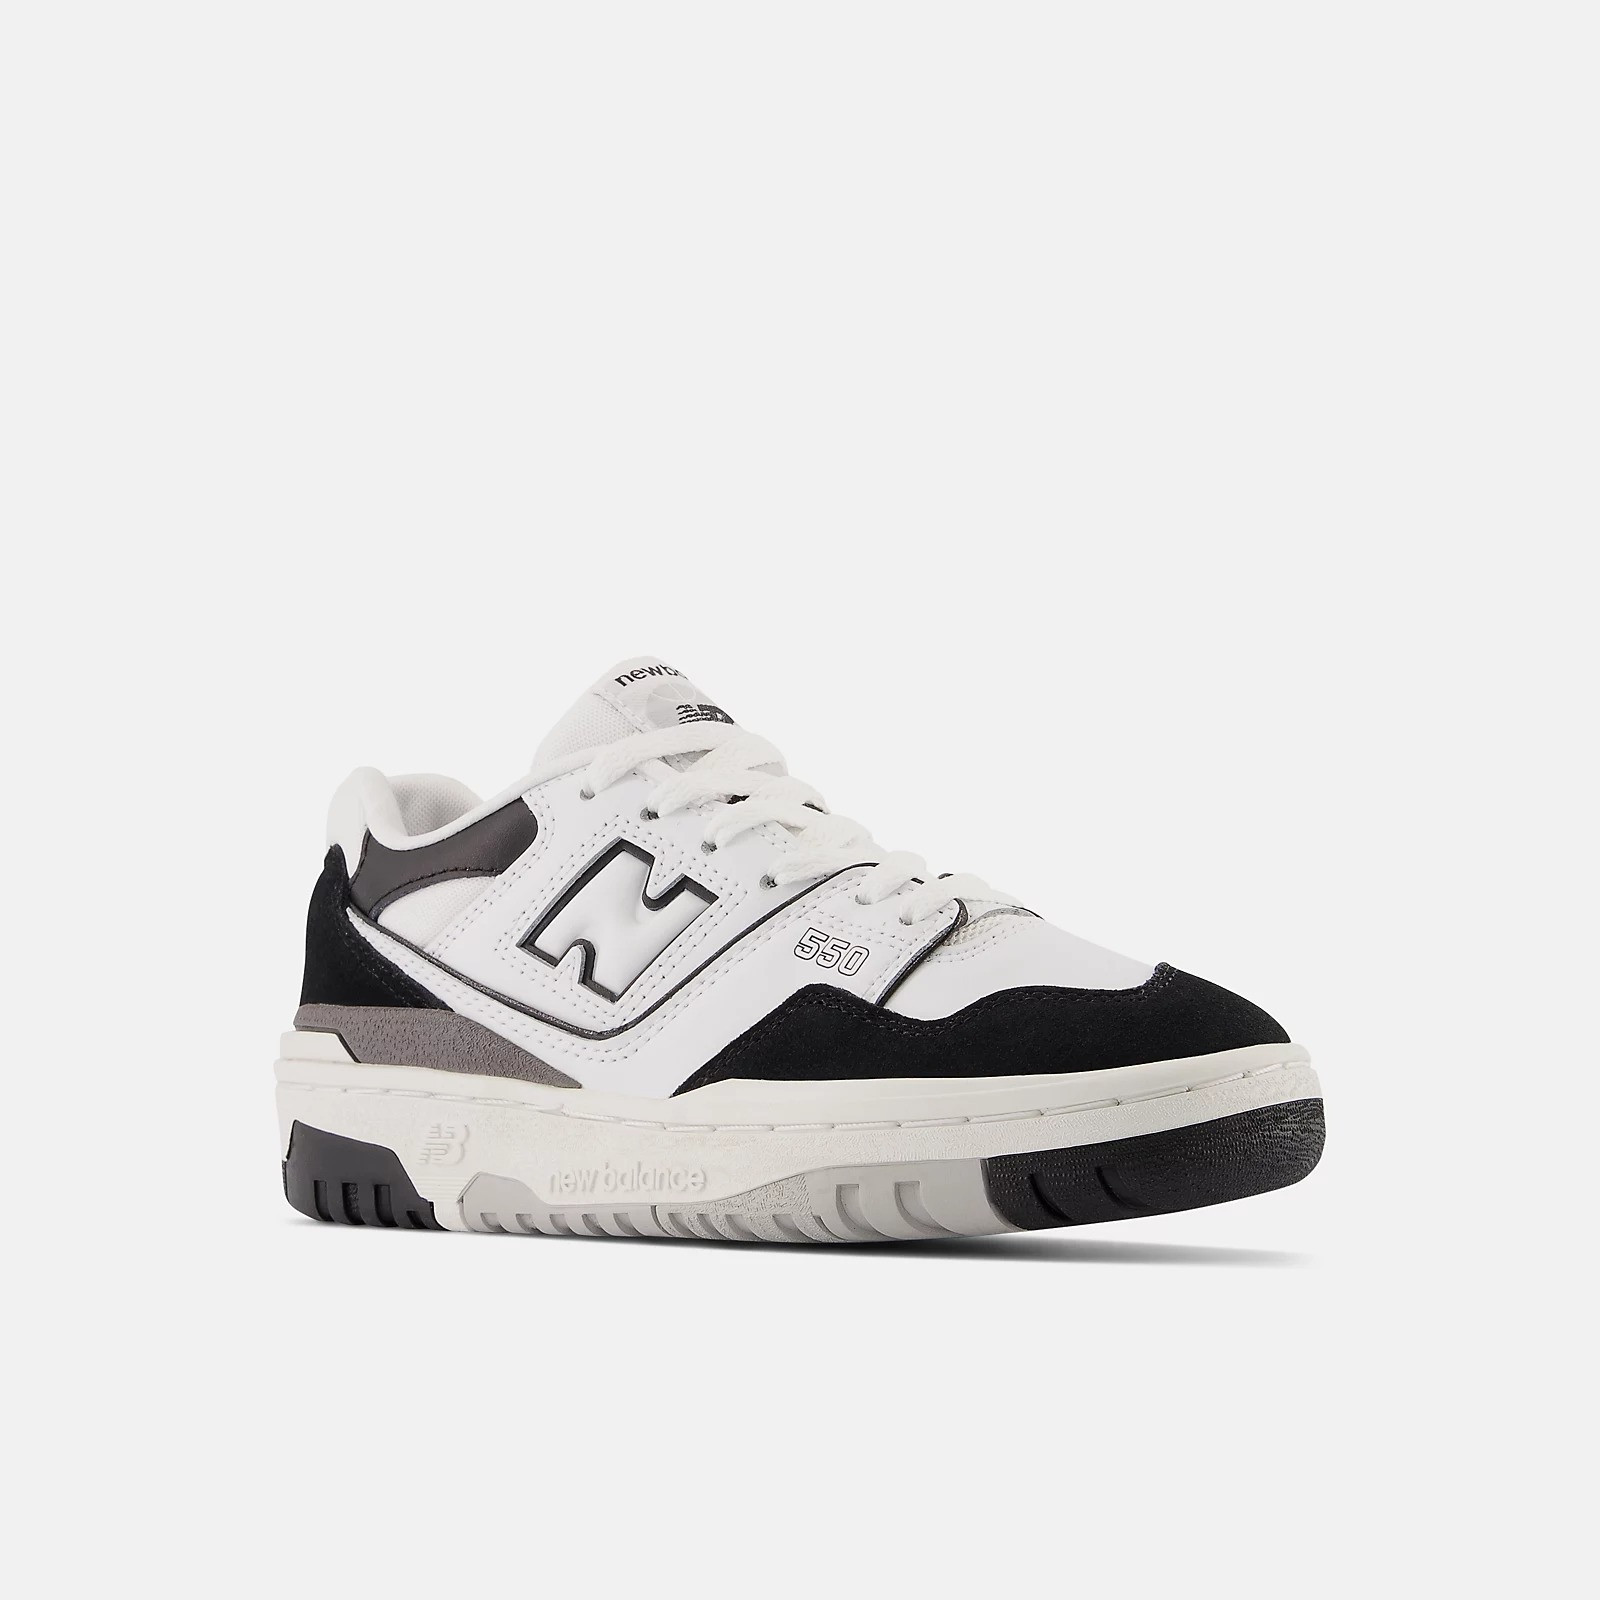 New Balance 550 GS shoes for children (Unisex 36 to 40) - White/Black - GSB550CA